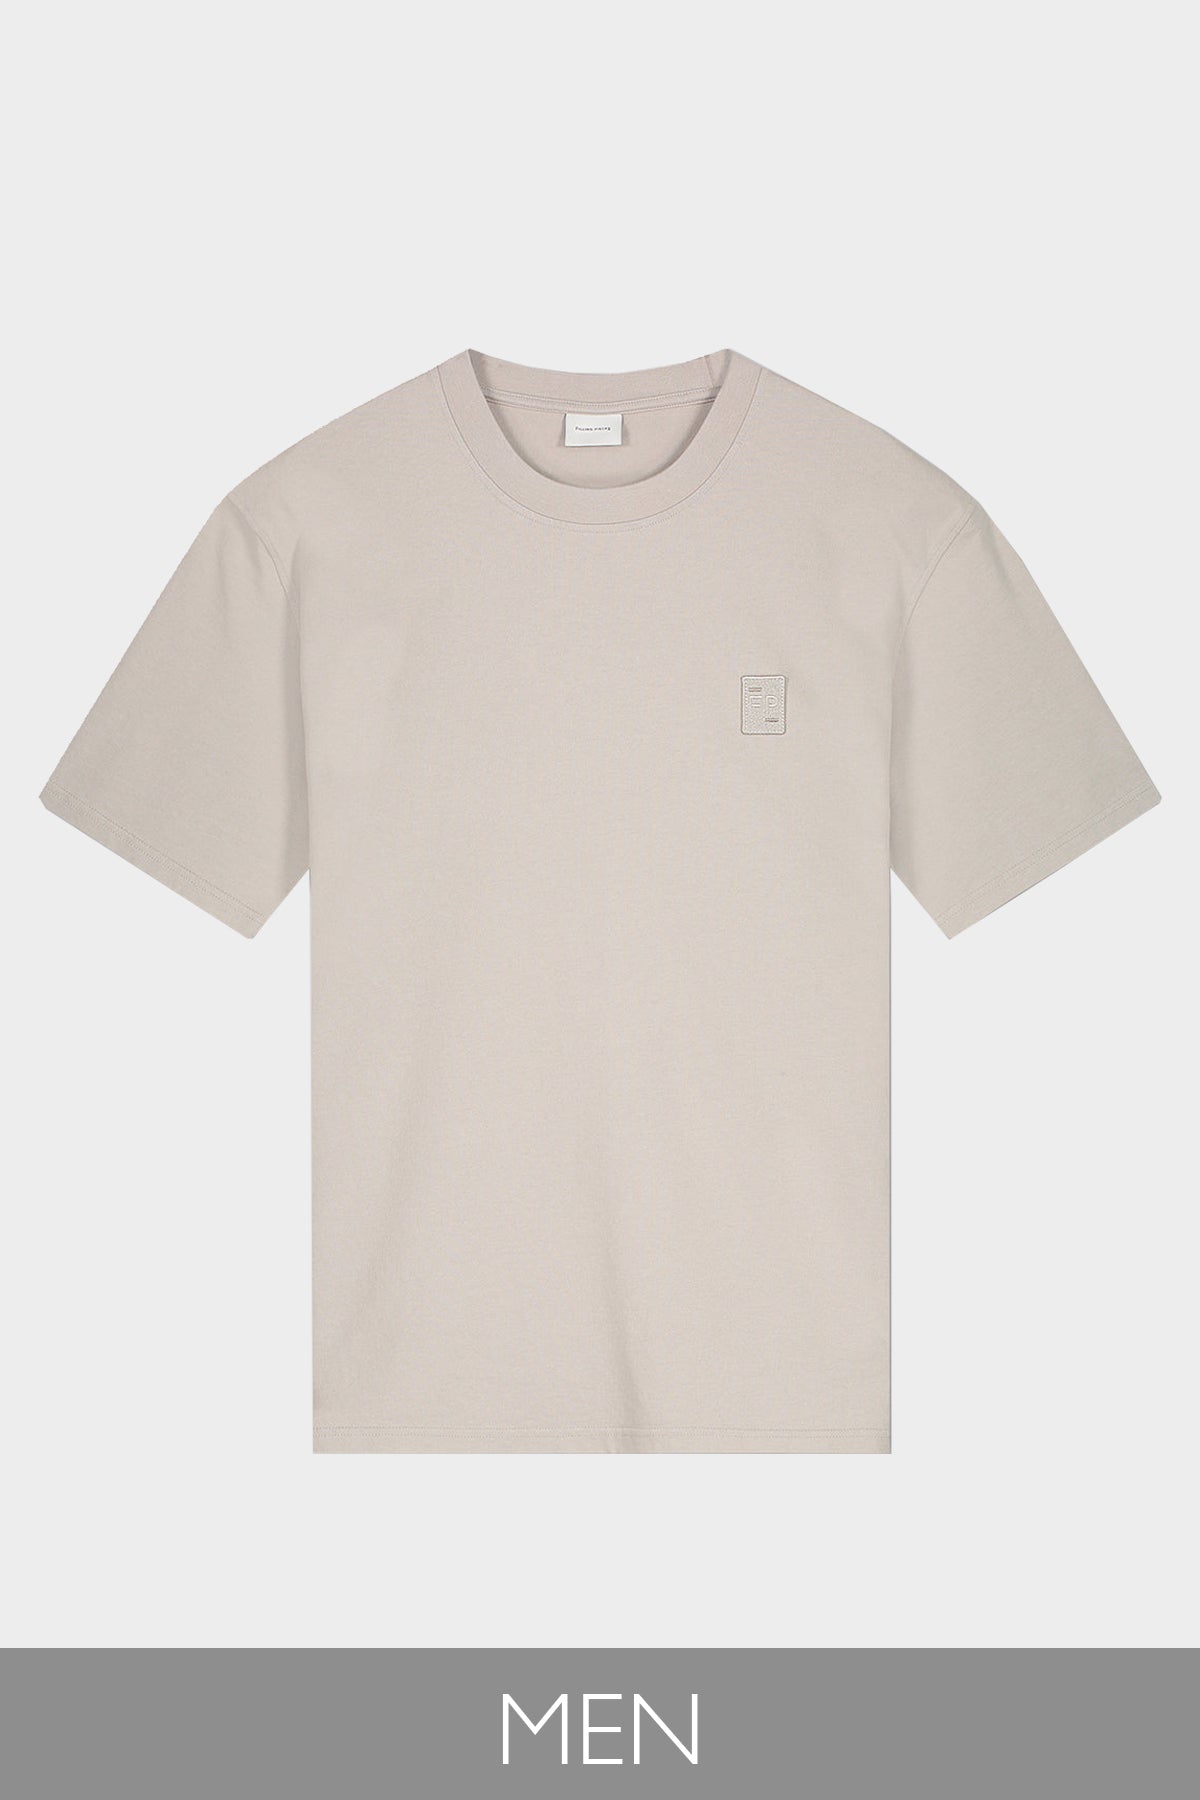 Lux Tee in Cool Grey - shop-olivia.com